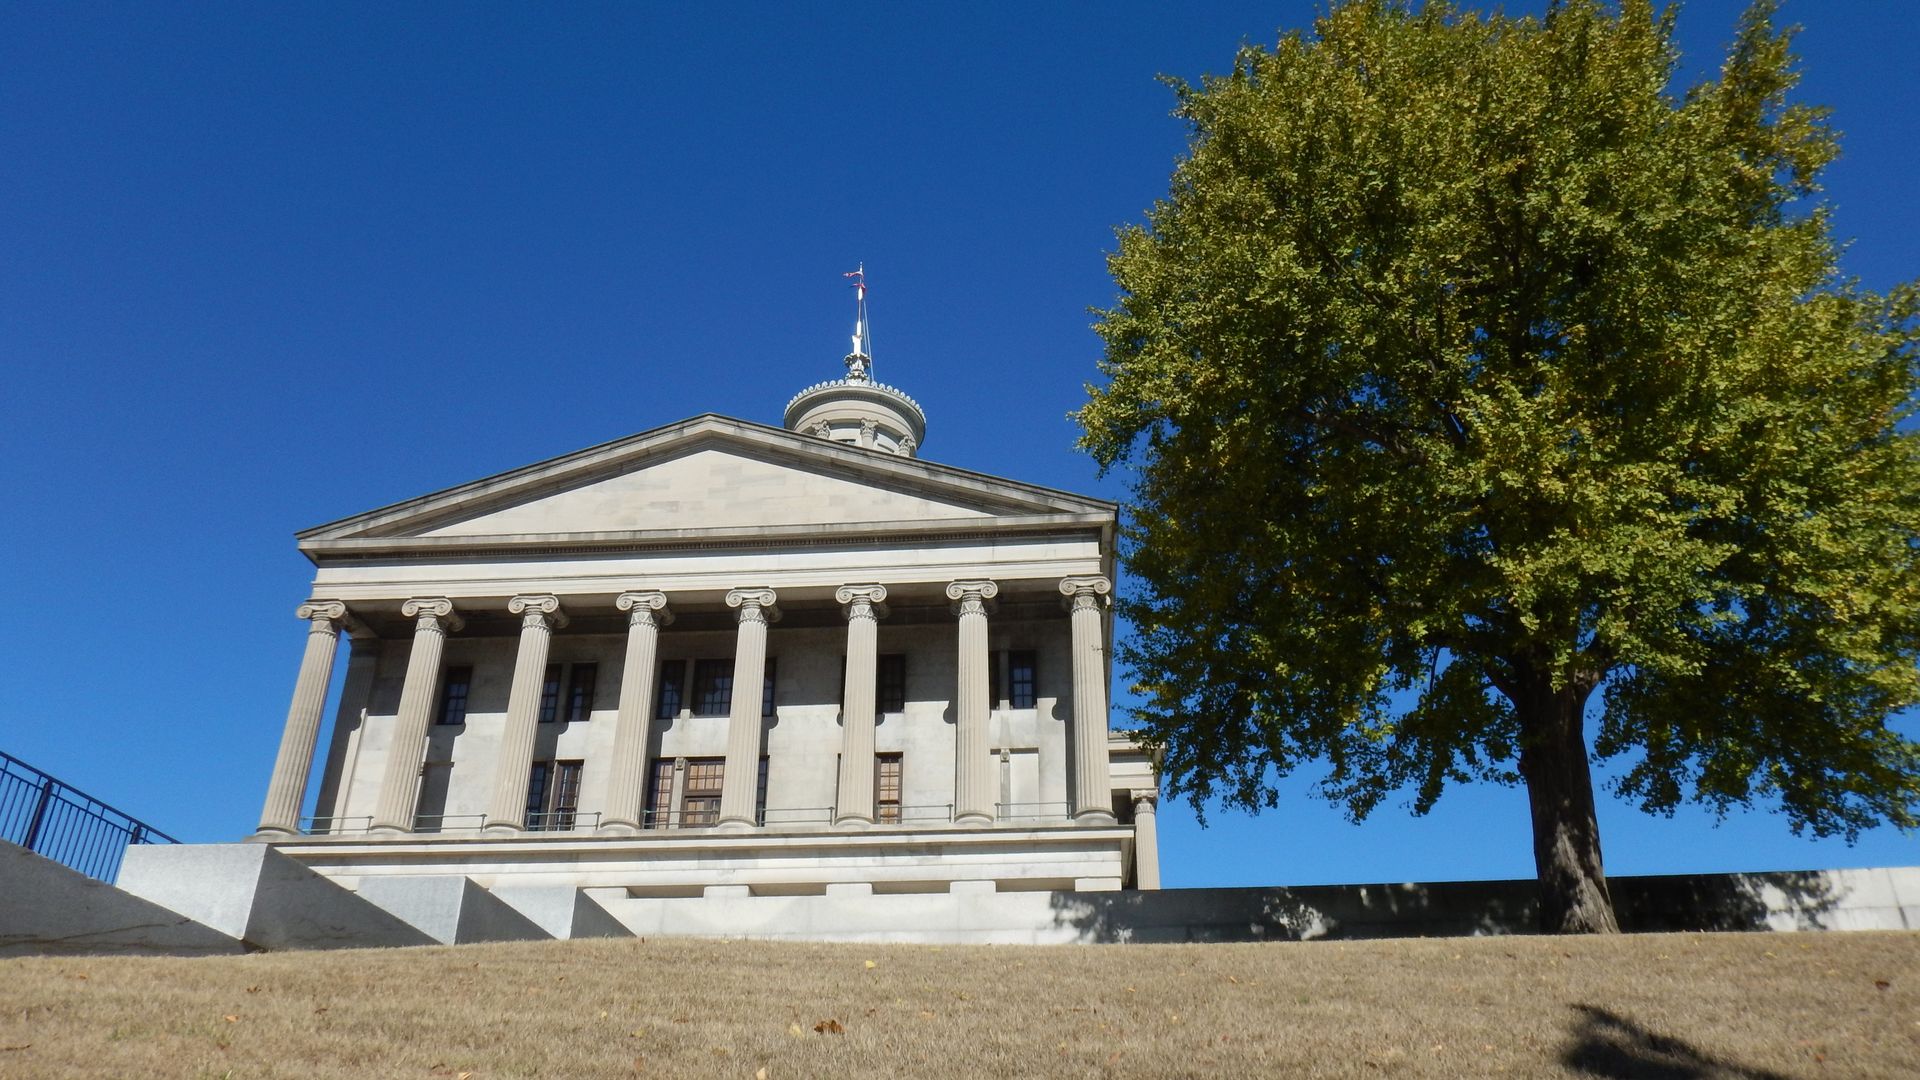 The Tennessee state capitol building